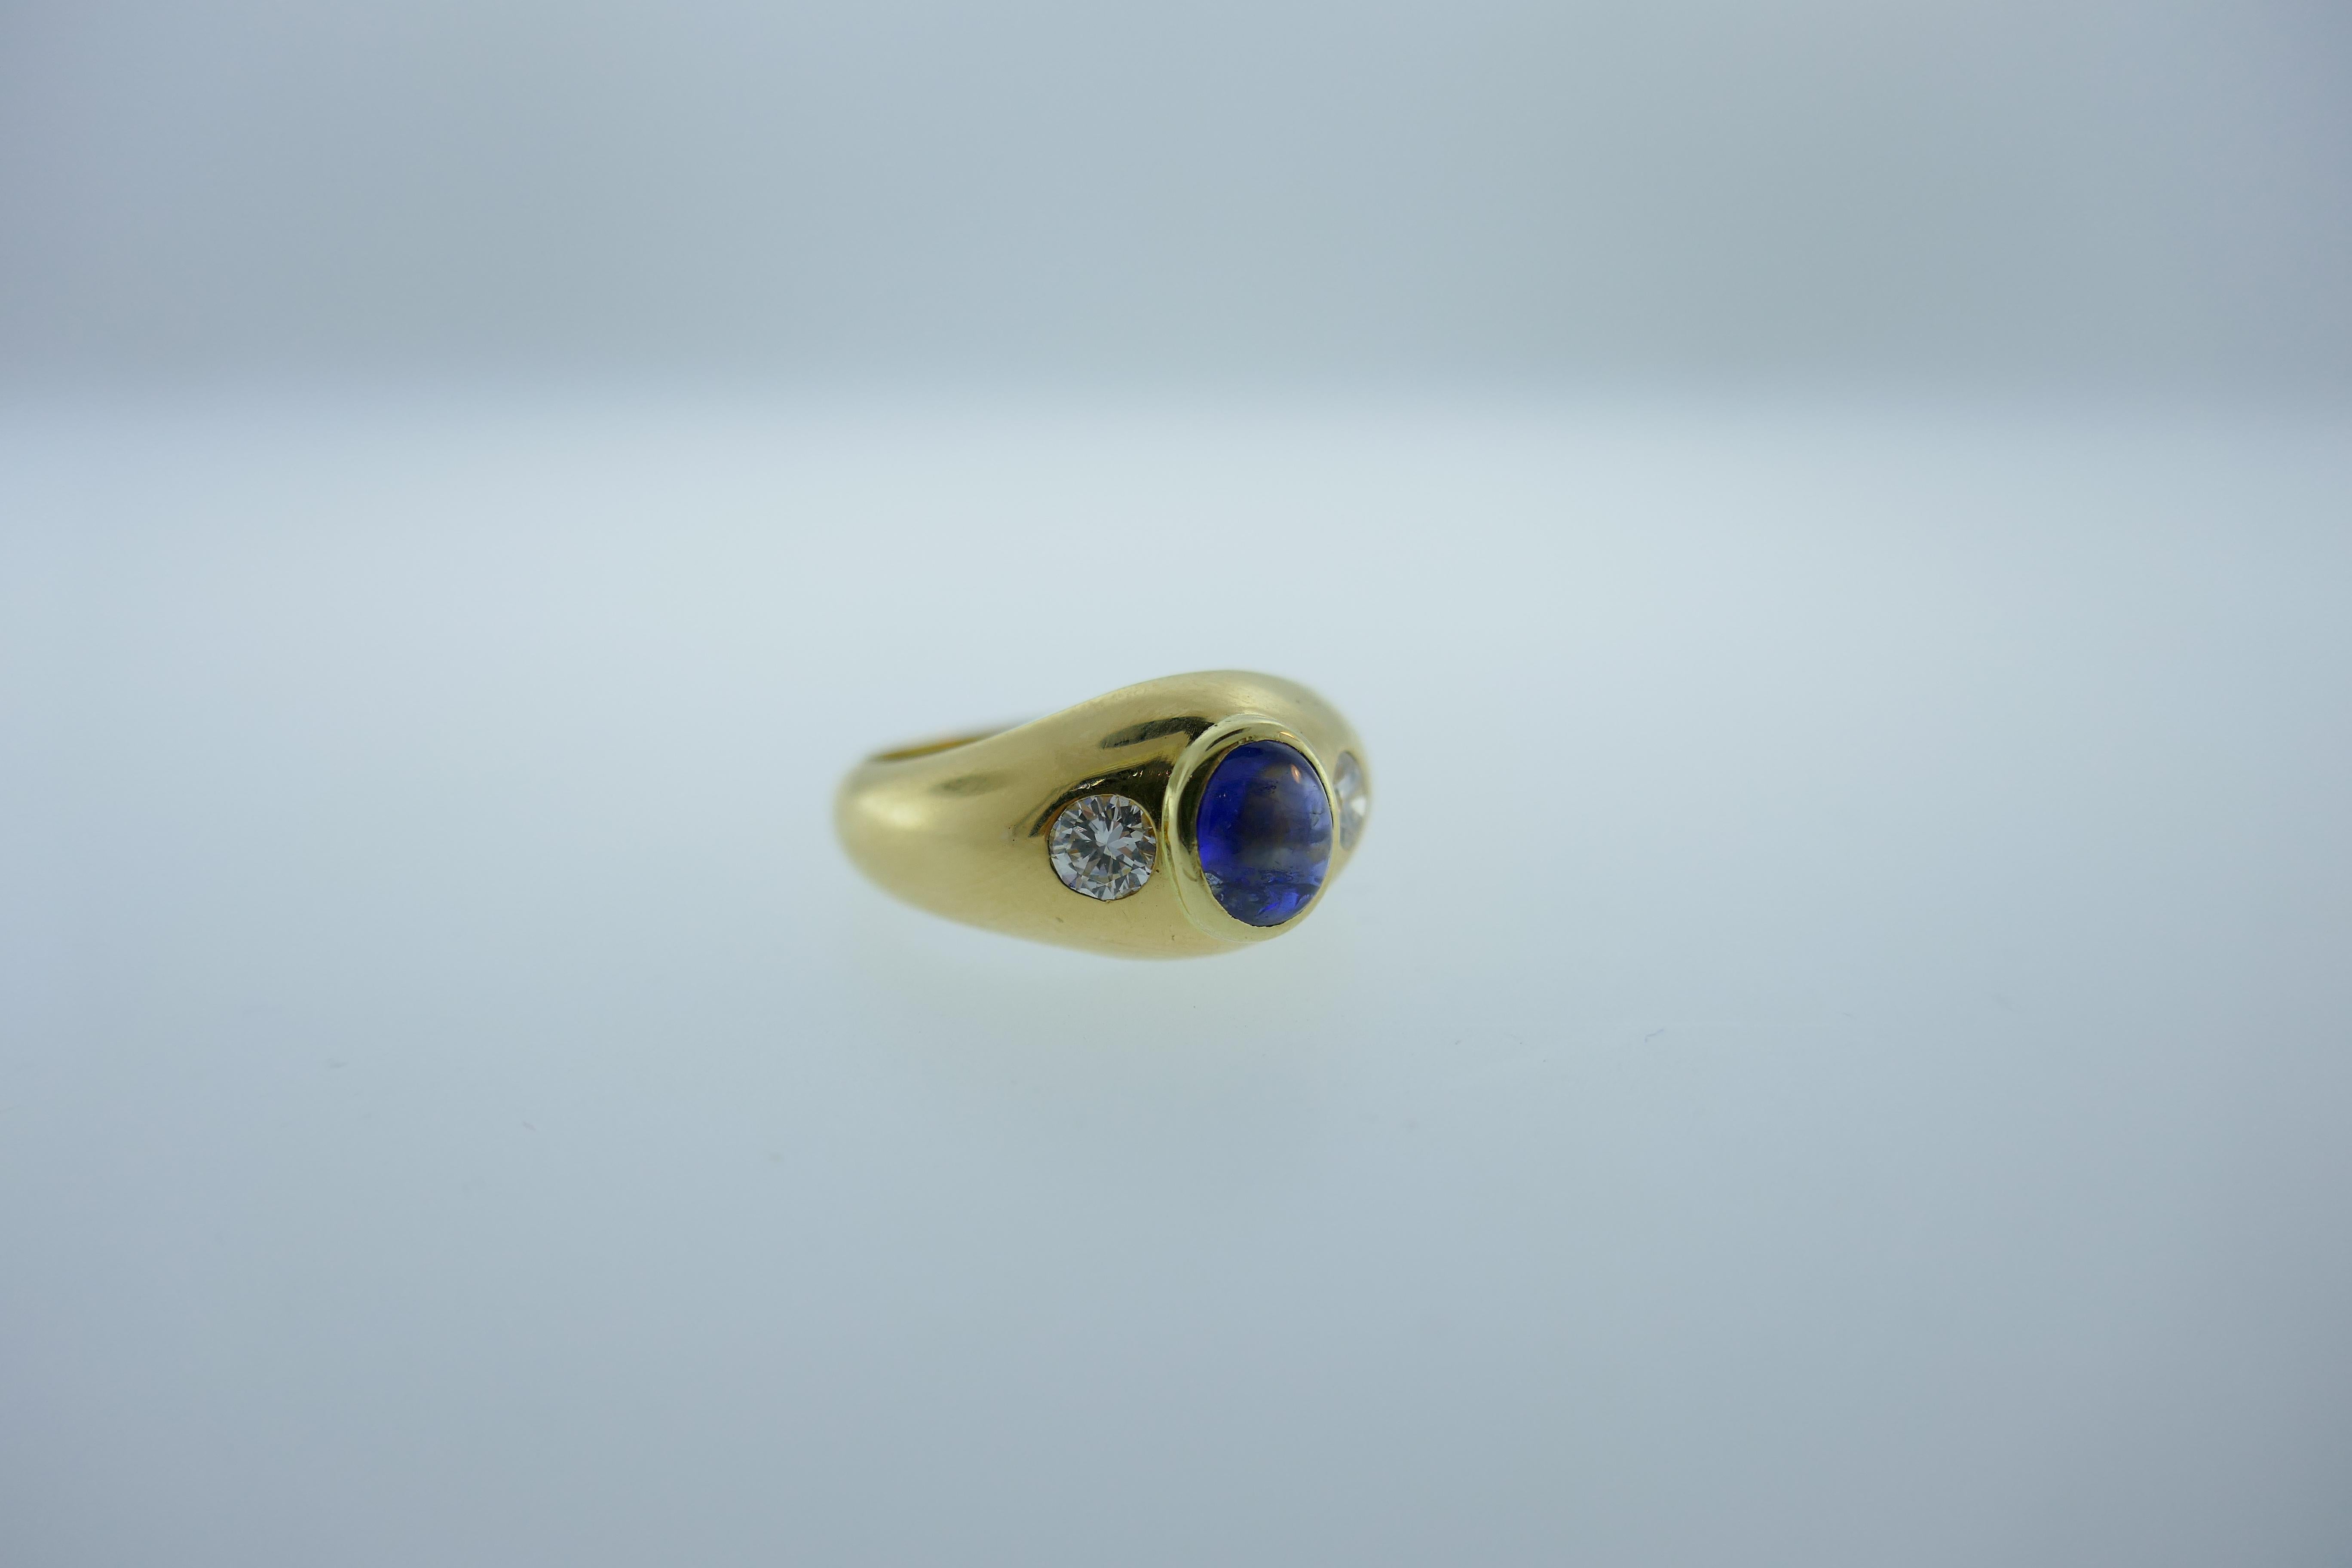 Cartier Paris 18k Yellow Gold, Cabochon Sapphire and Diamond Gypsy Ring Vintage 1